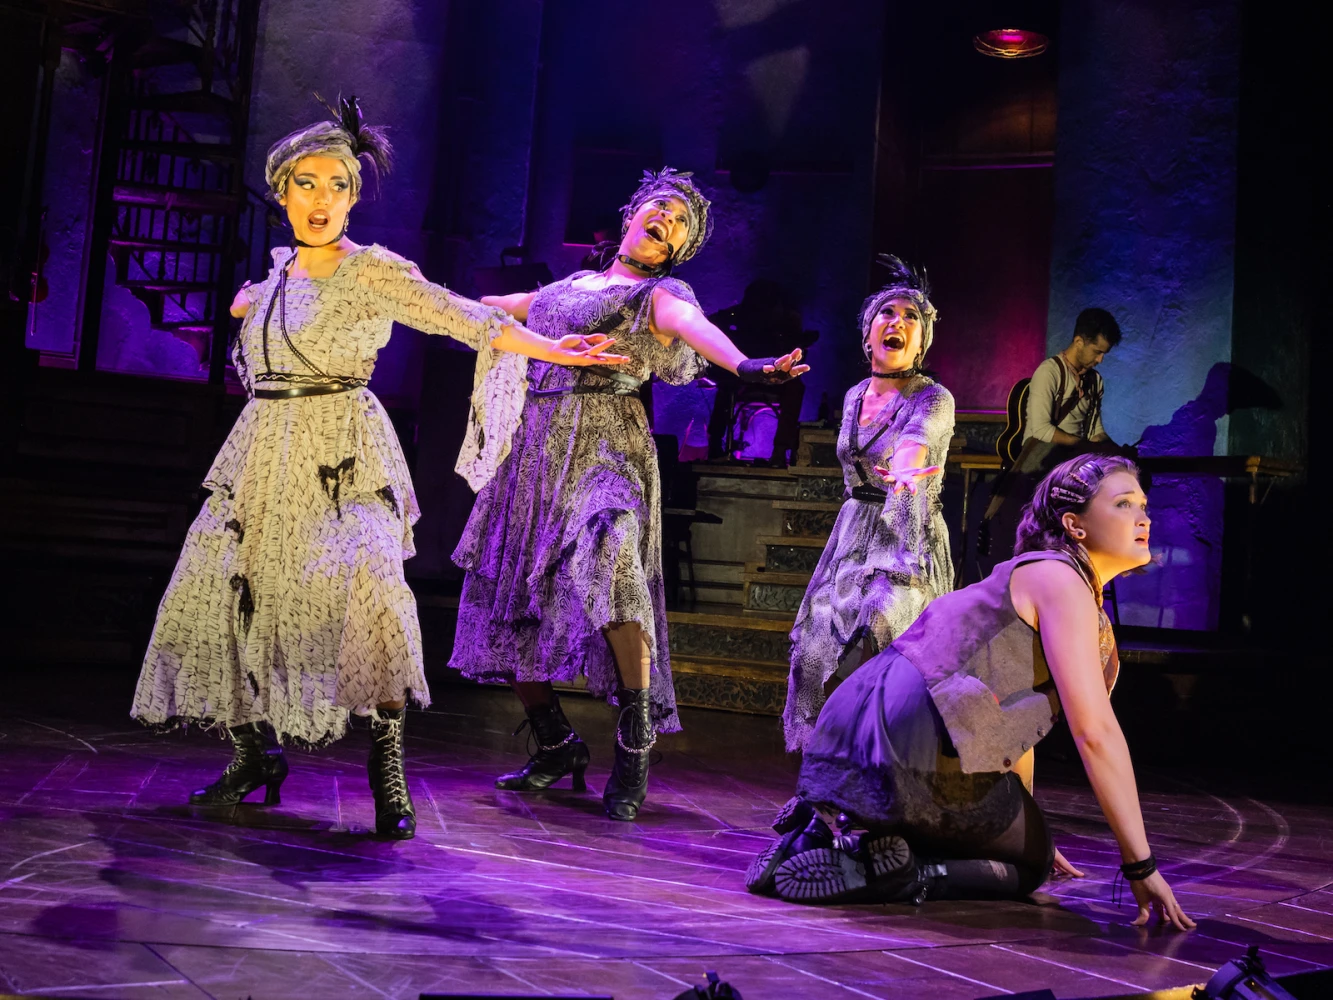 Hadestown on Broadway: What to expect - 8